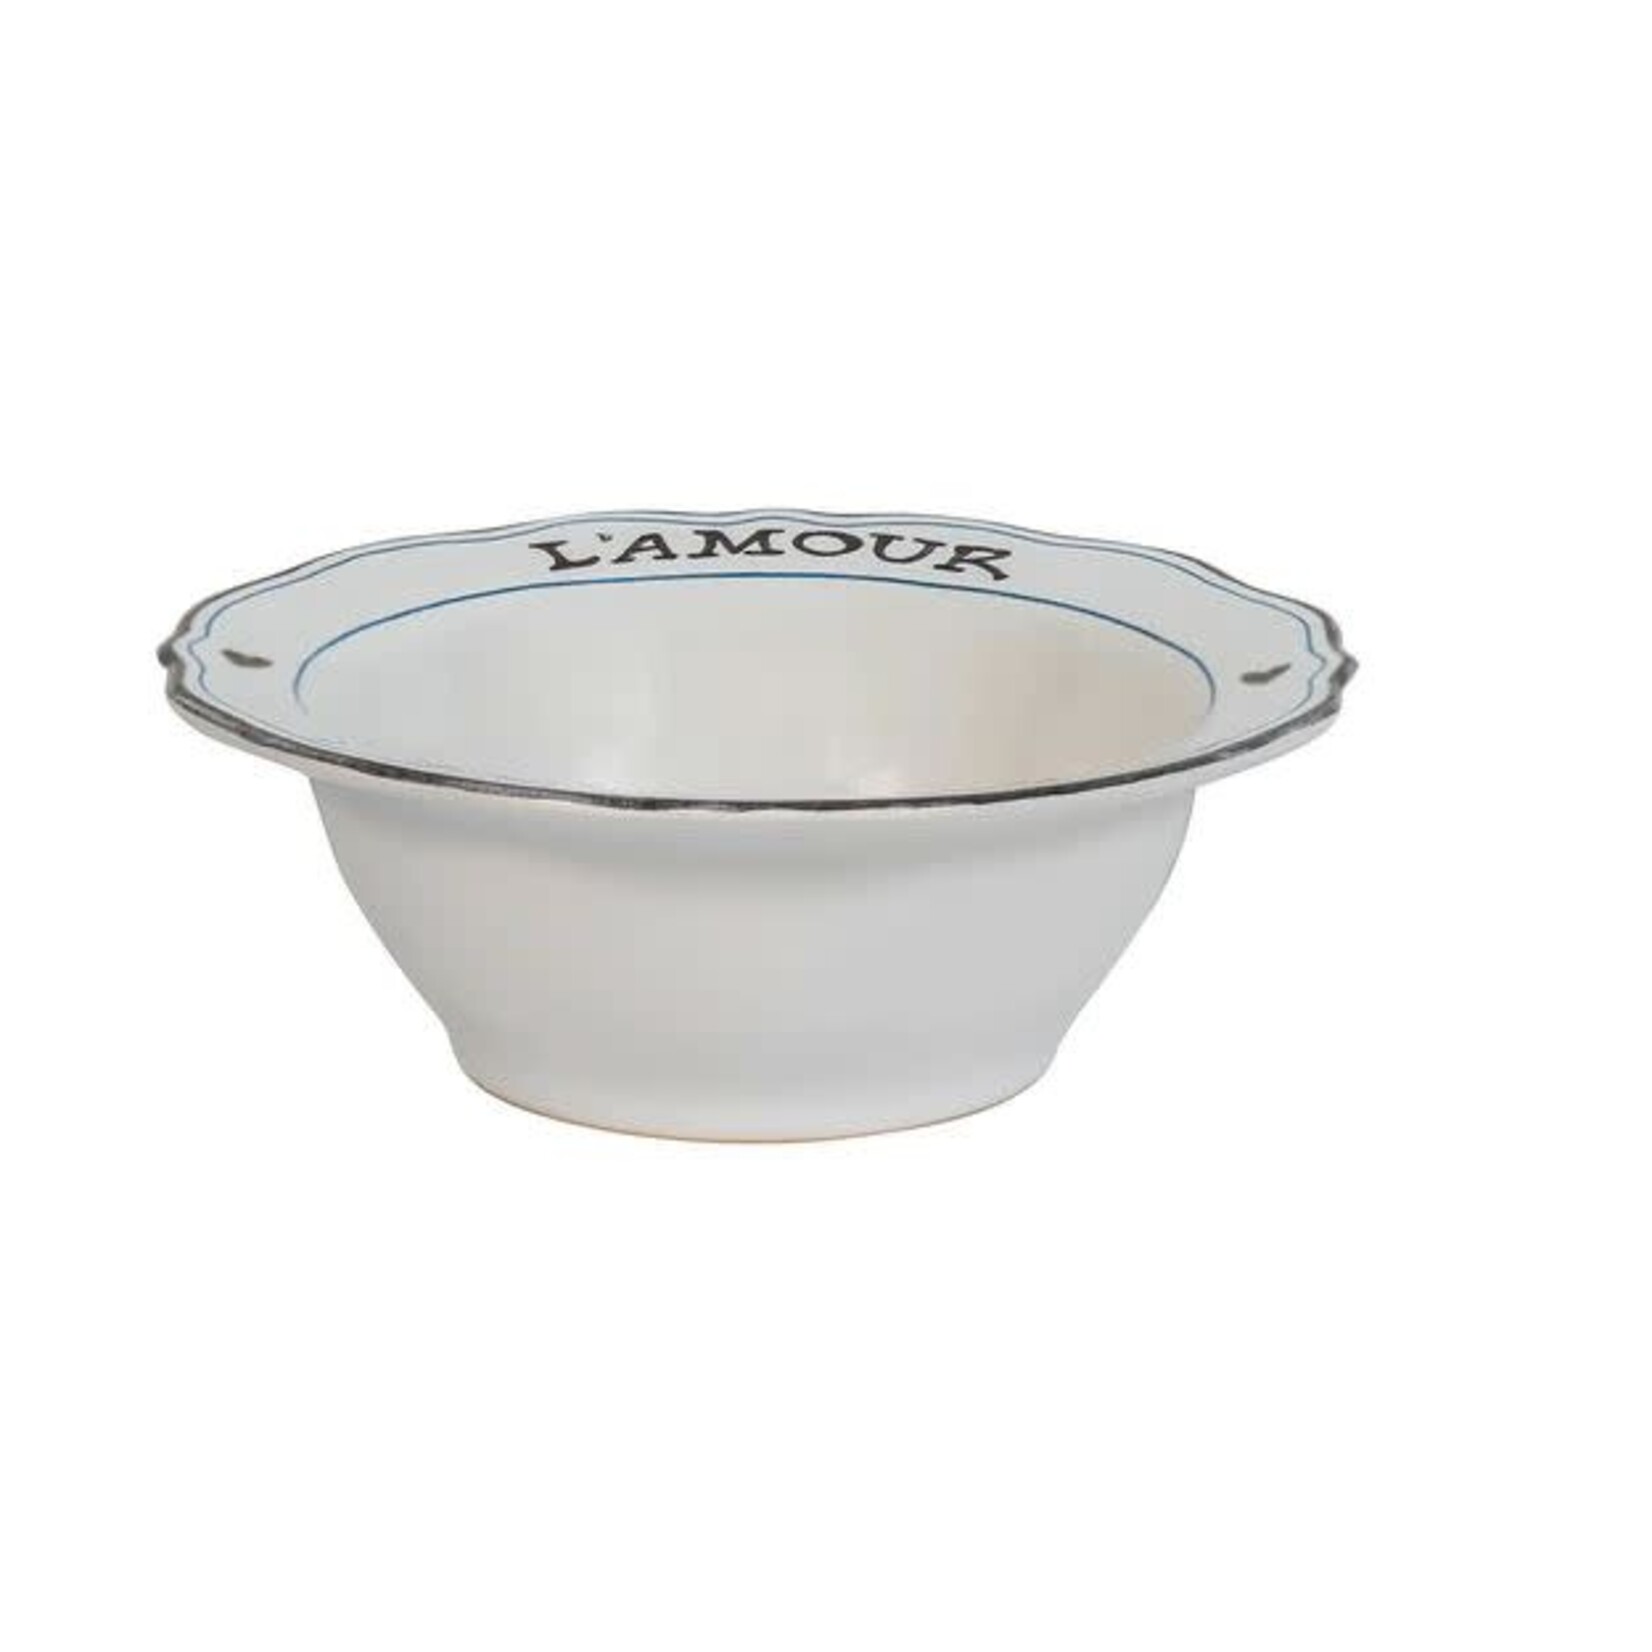 Juliska L'Amour Toujours Cereal Ice Cream Bowl